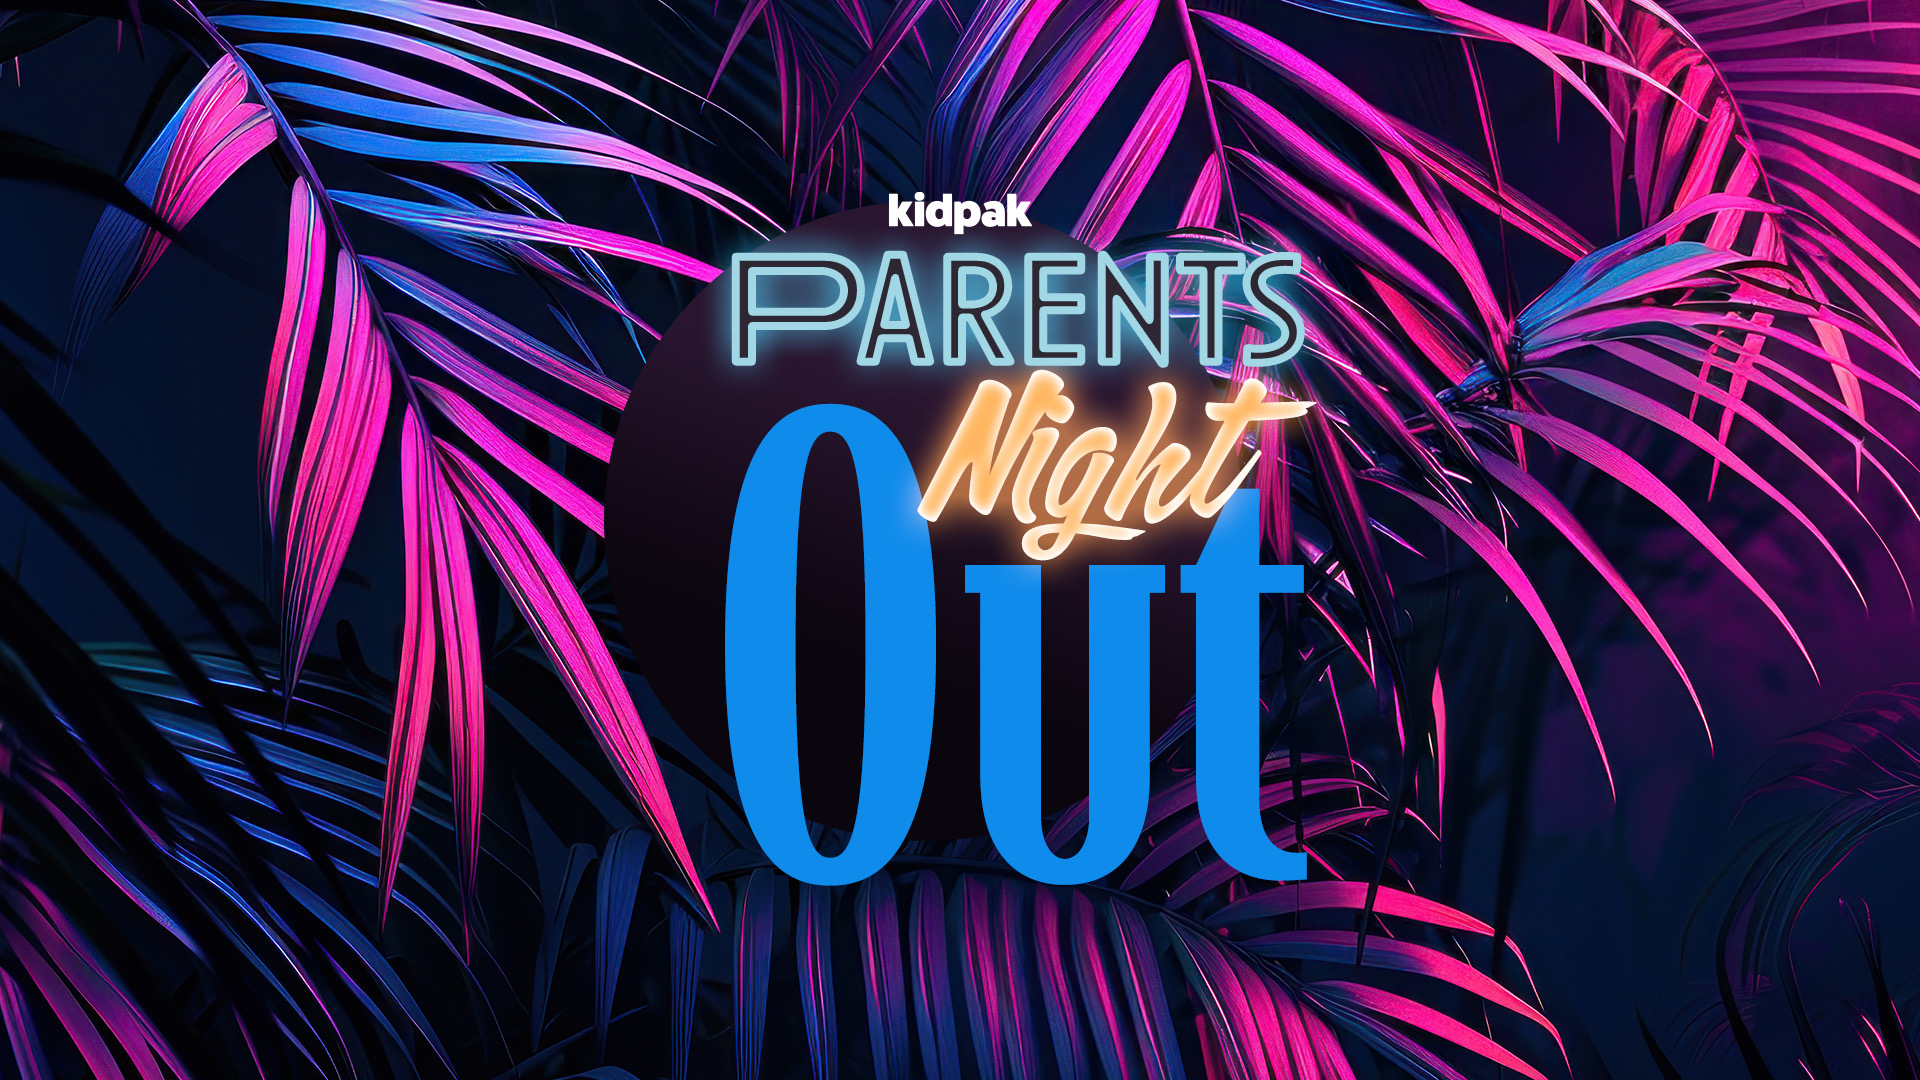 Parent's Night Out at the Orange County campus